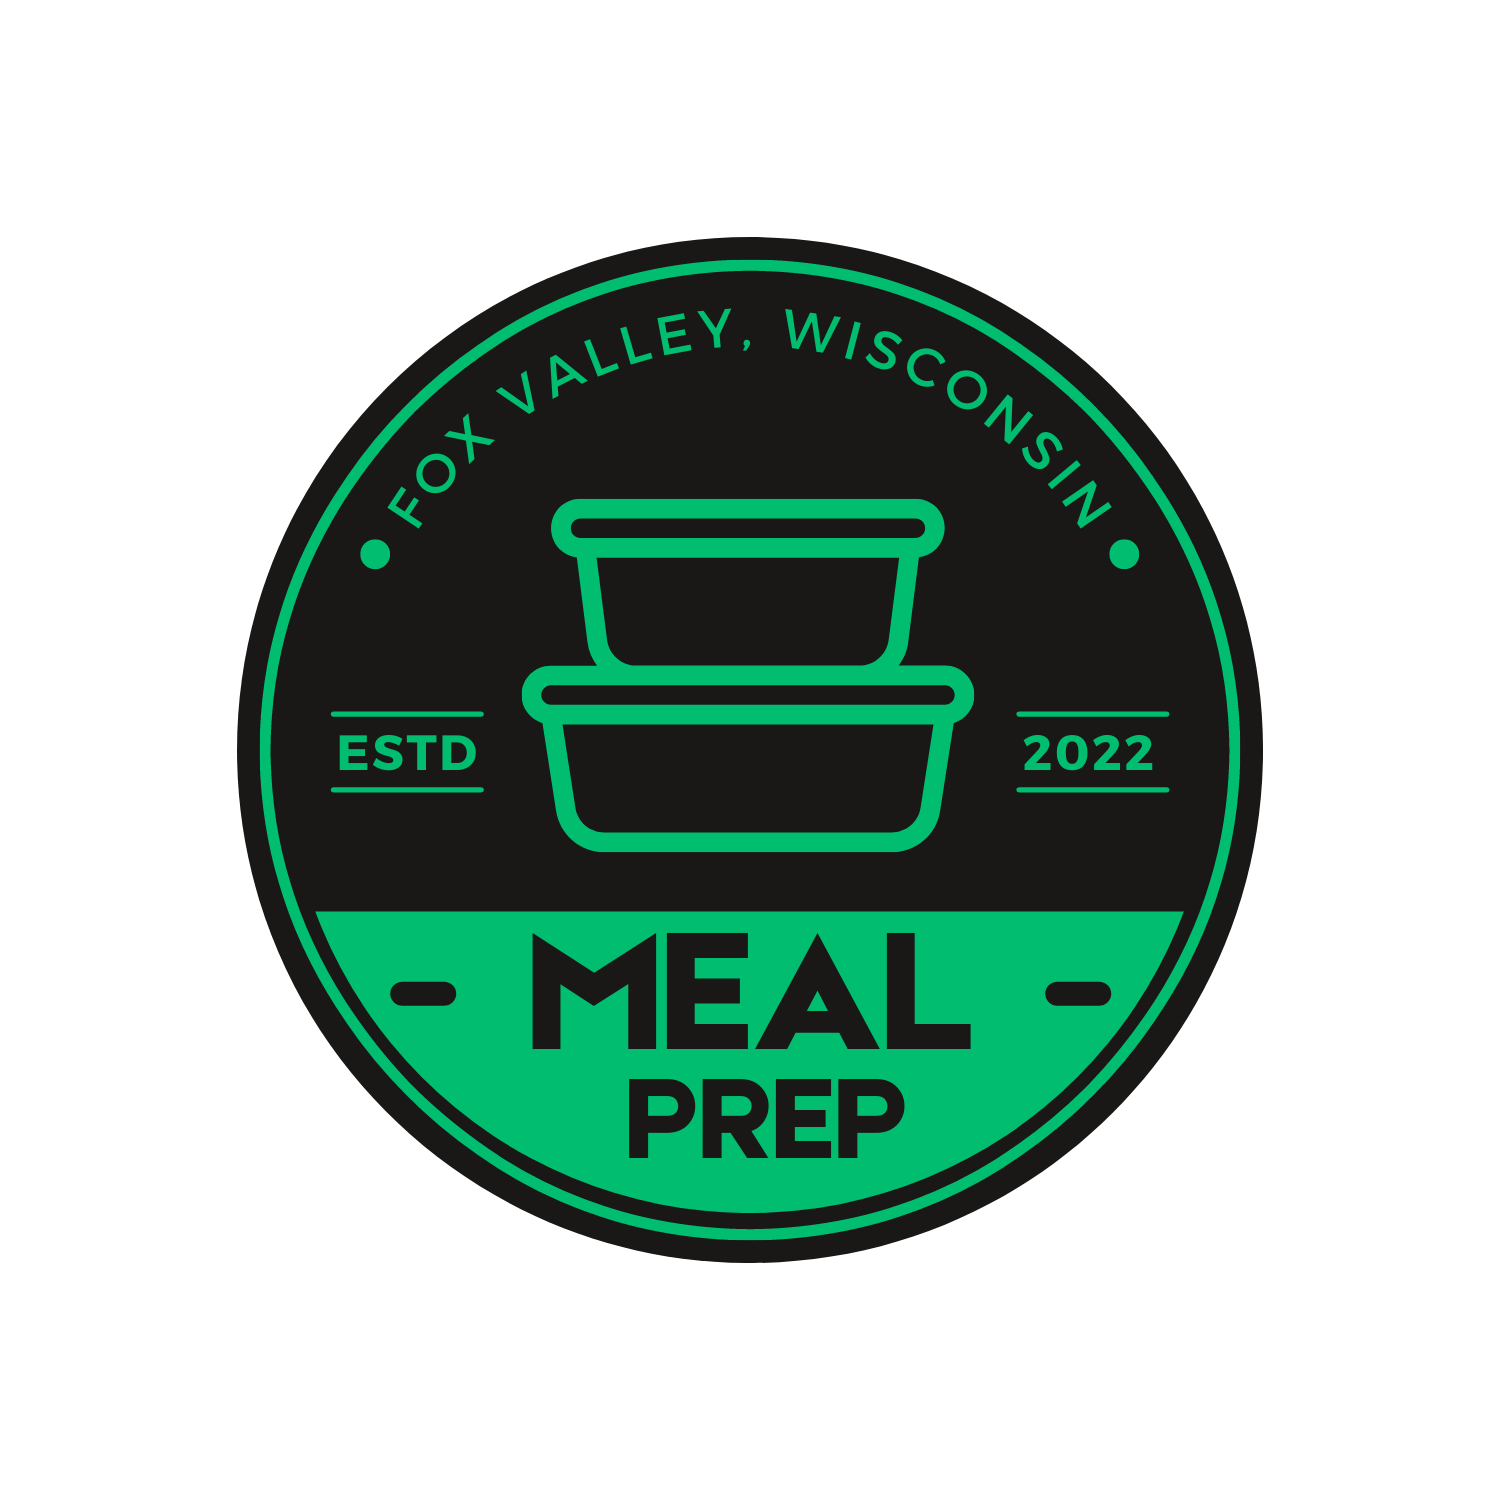 Fox Valley Meal Prep